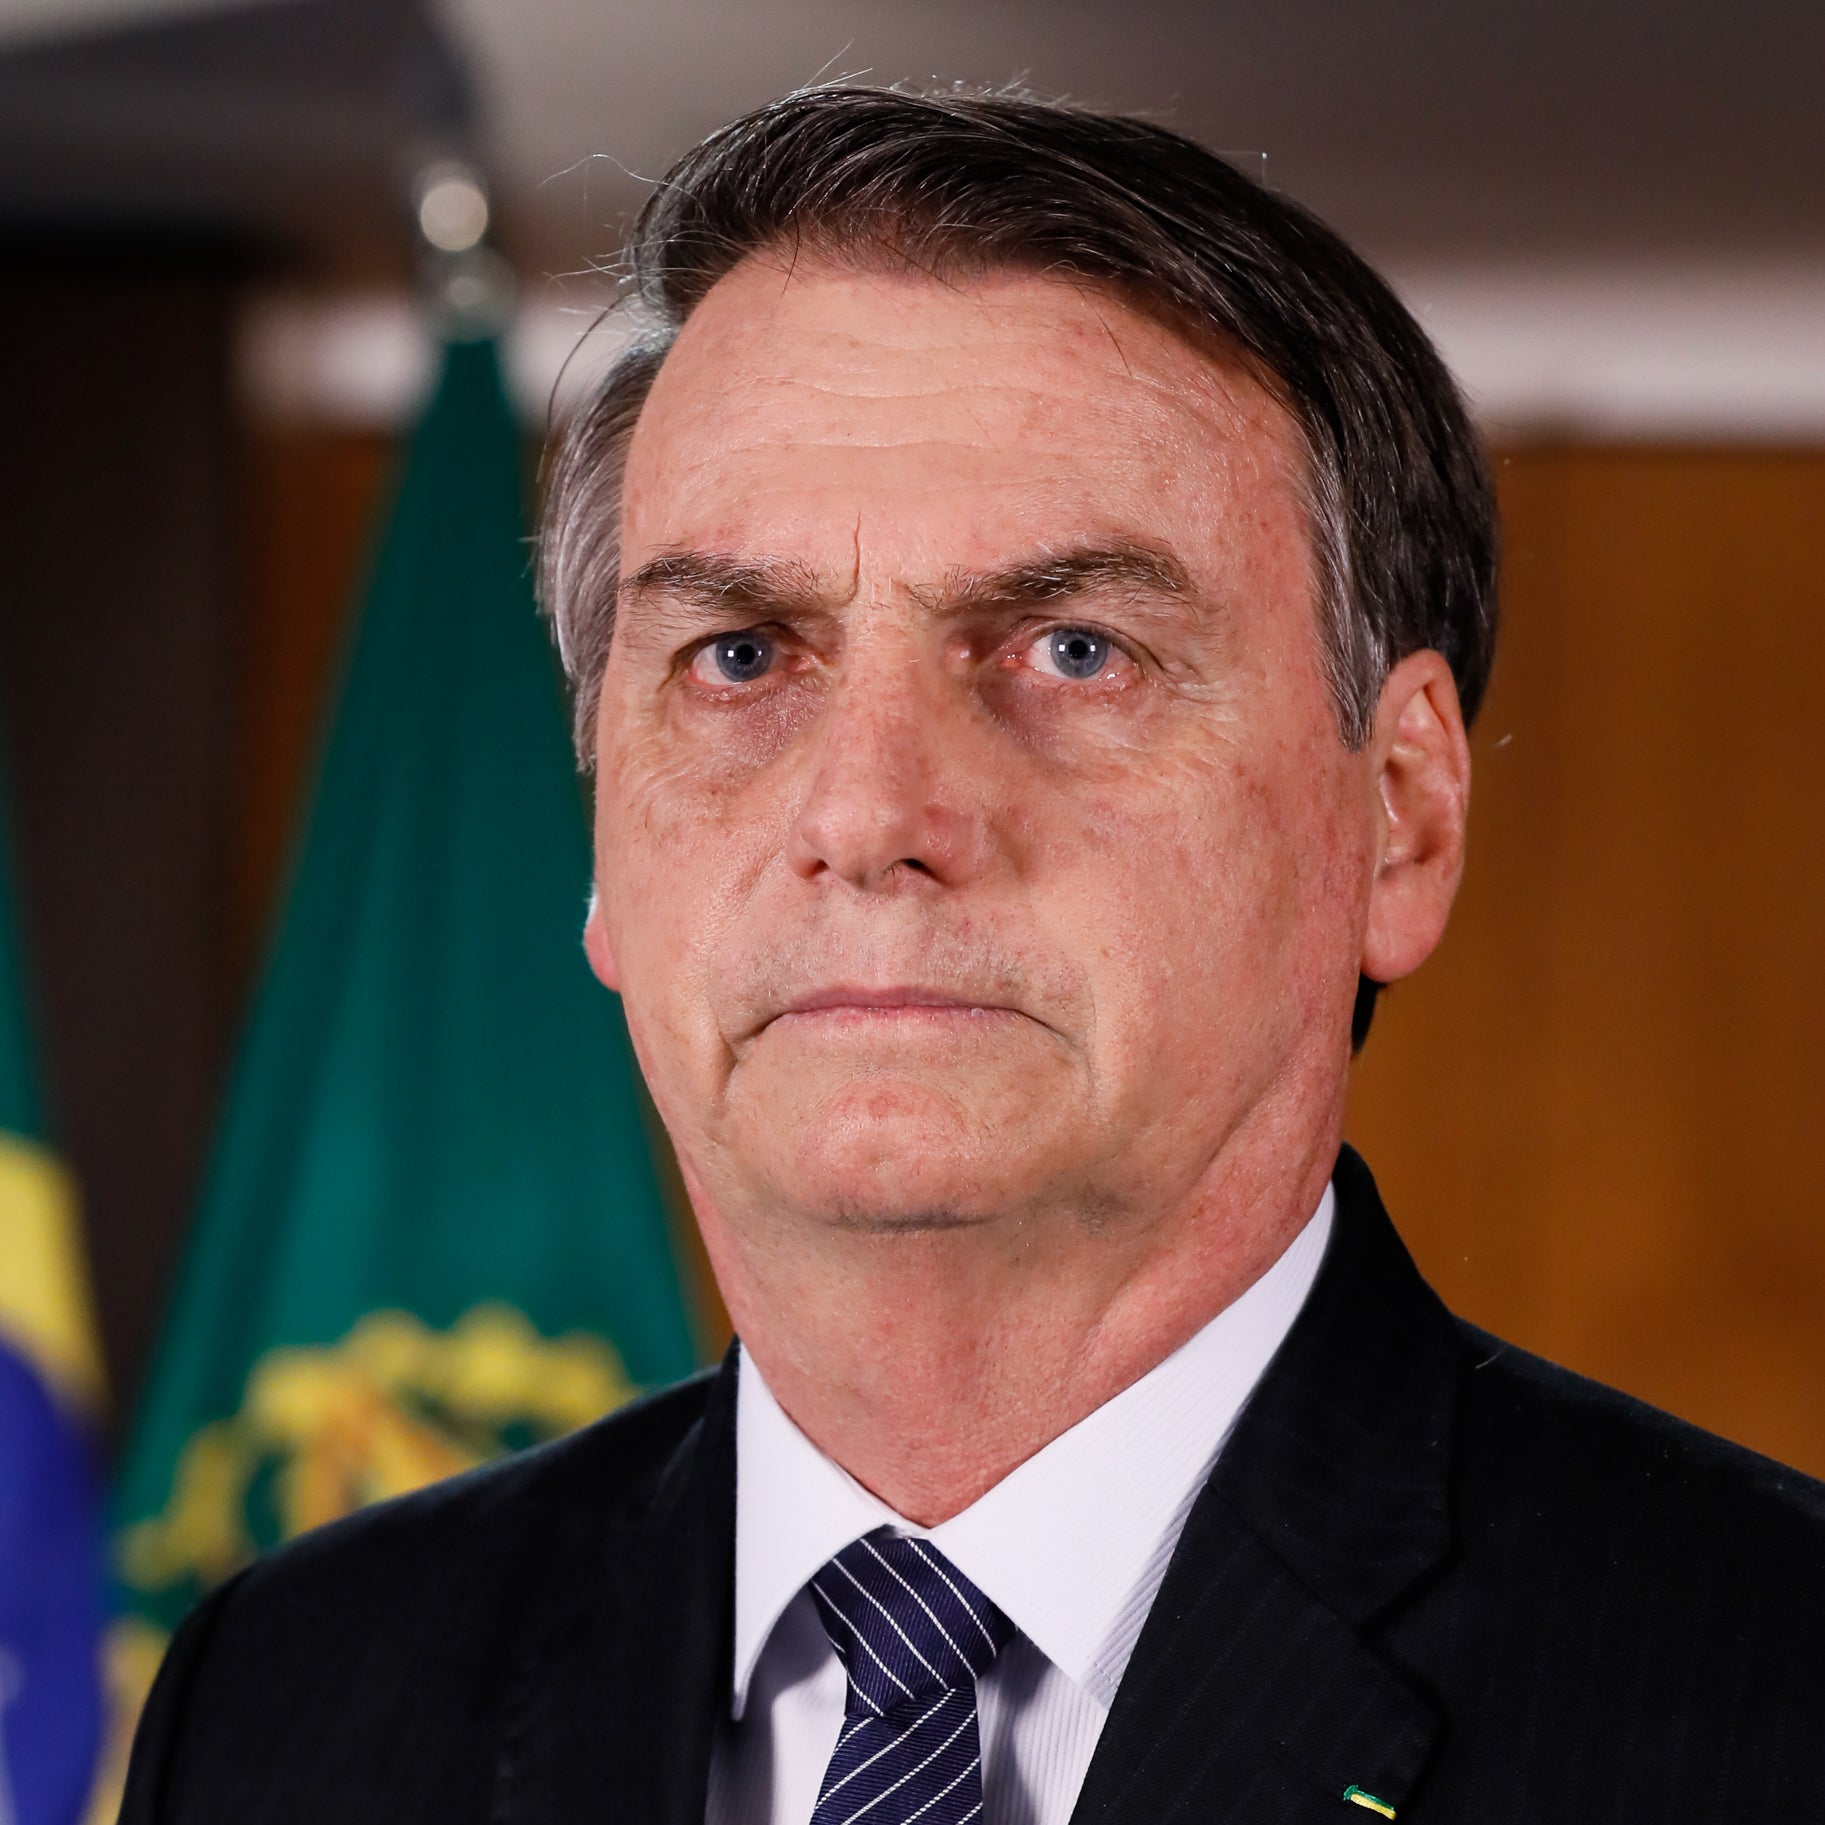 Bolsonaro looks at the camera in a very serious but confused manner.